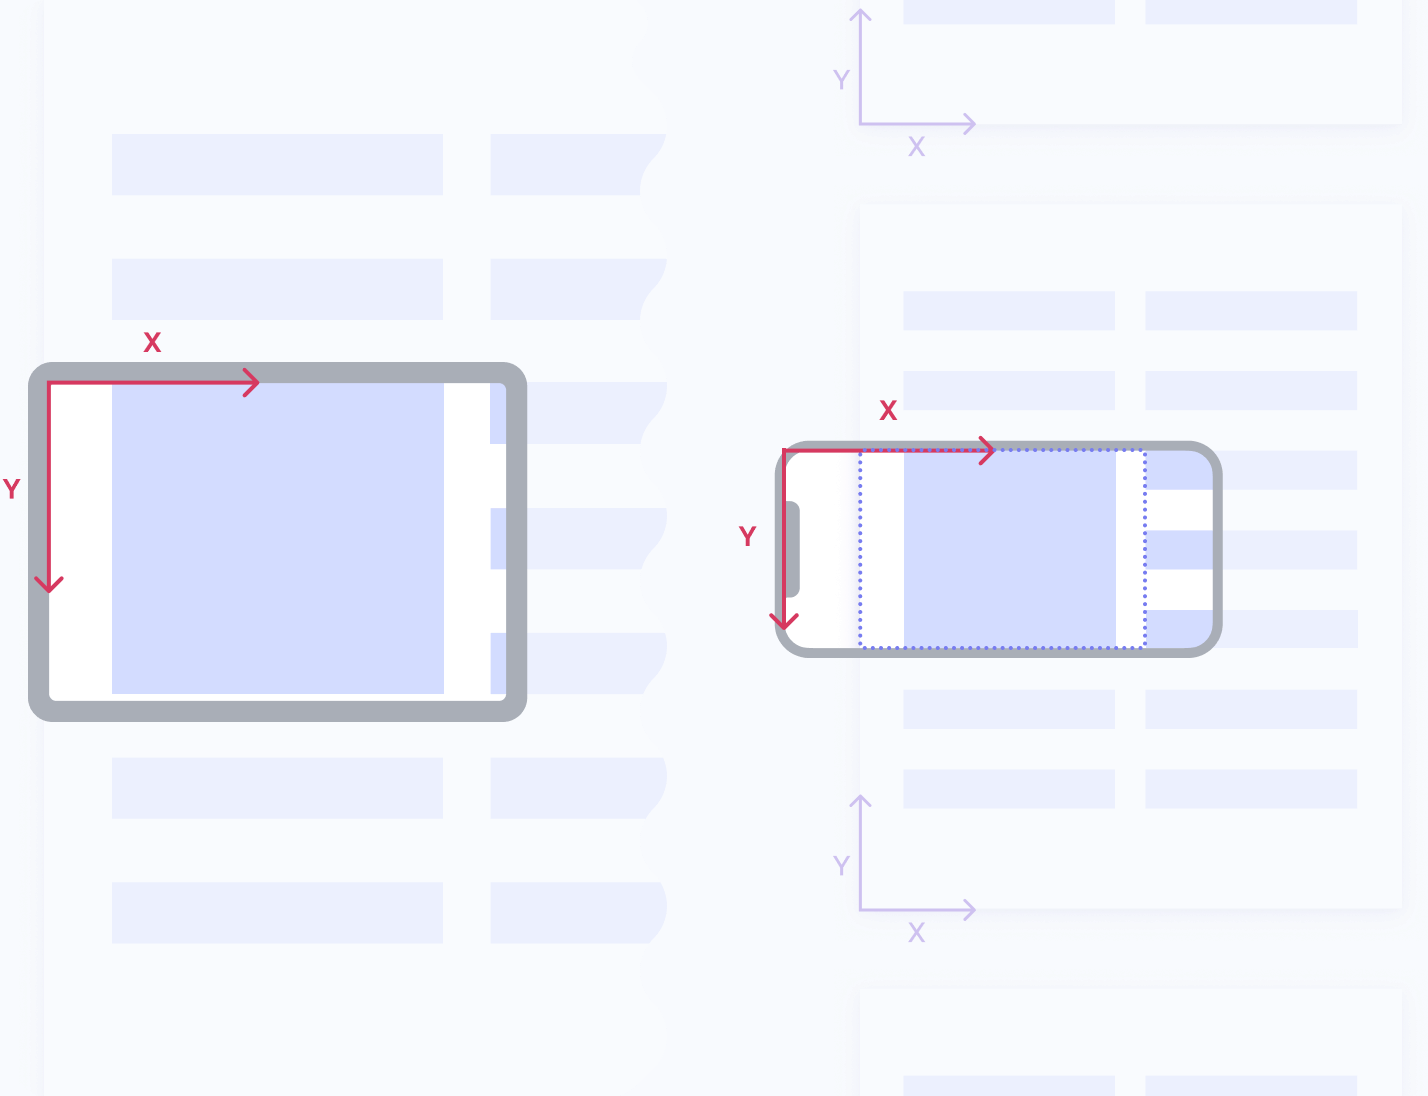 Aspect-fit scaling to a wider display.